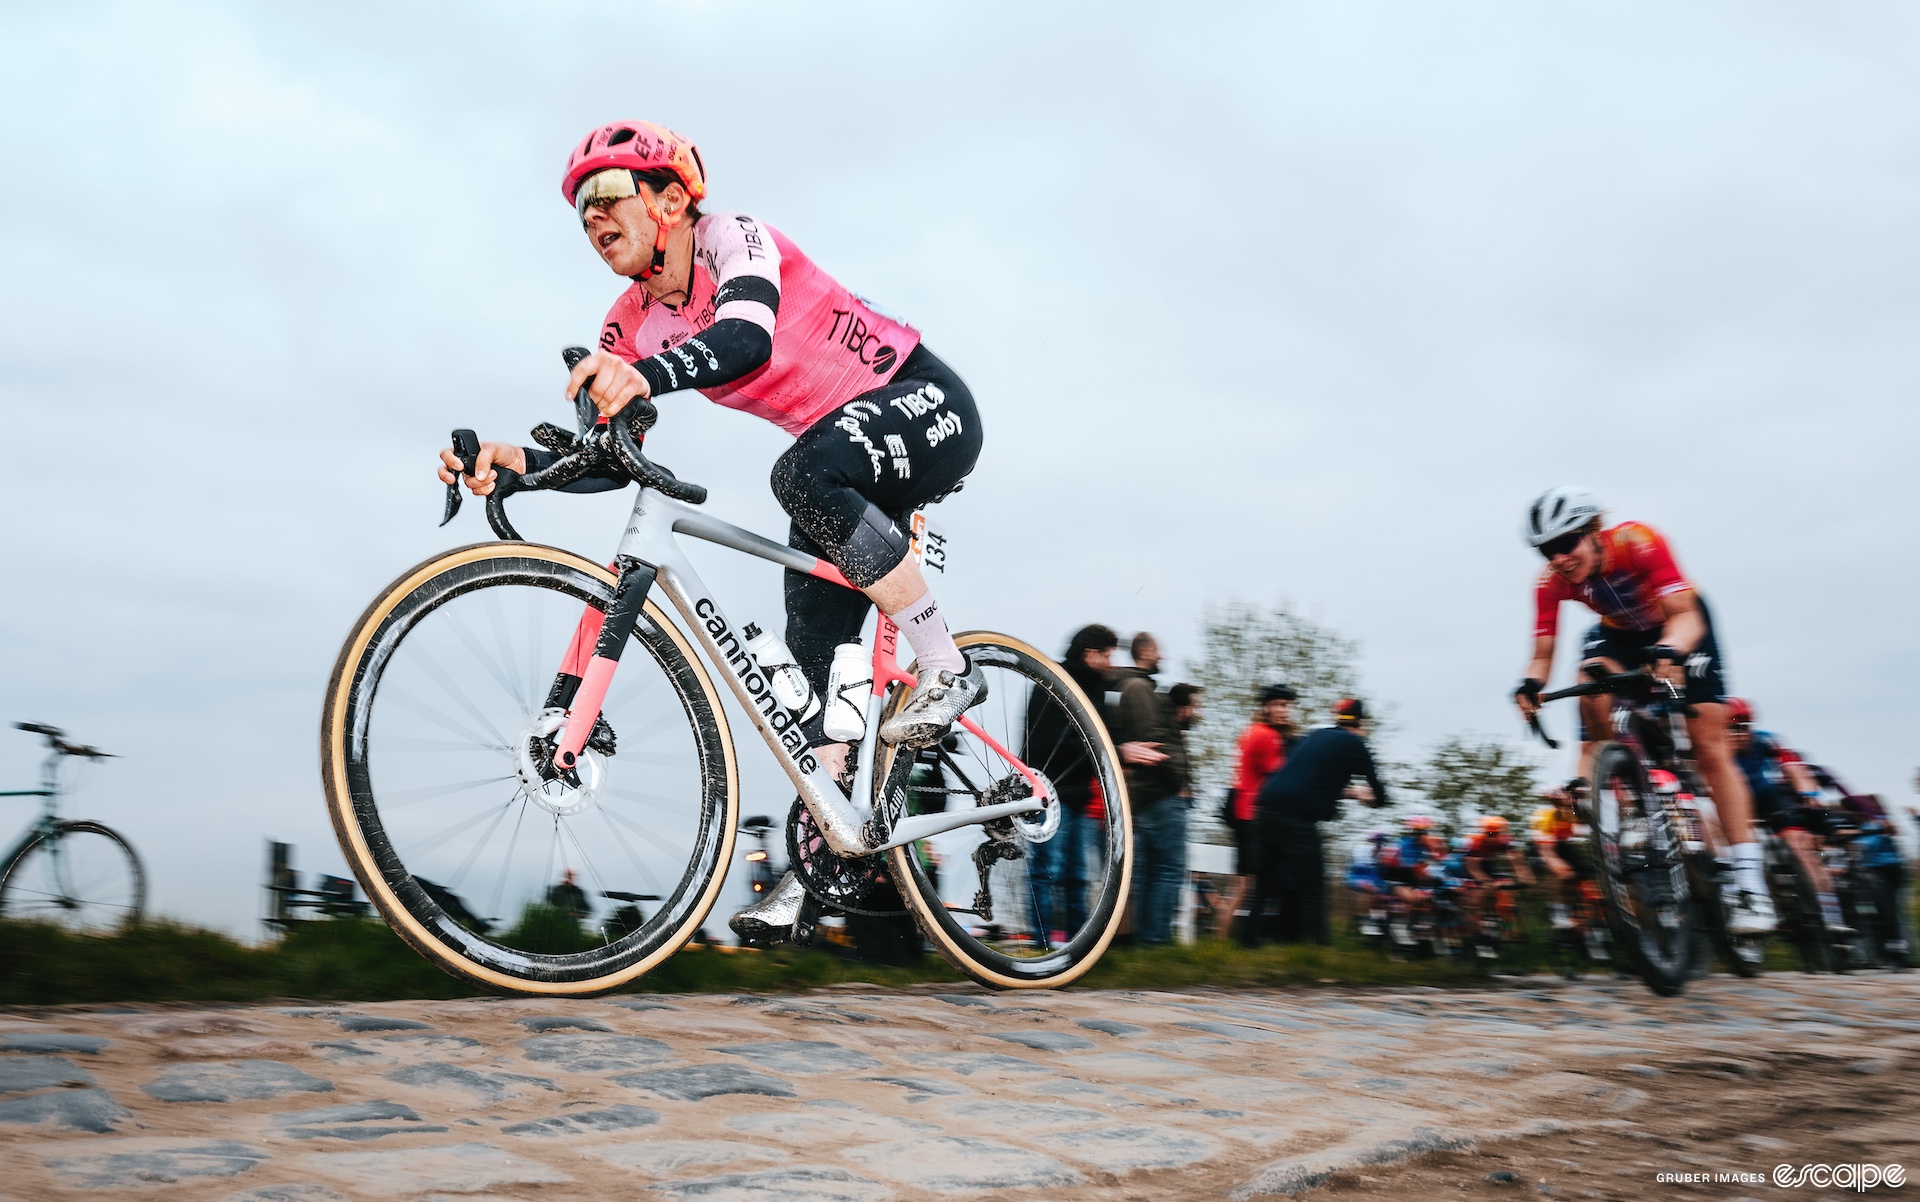 Jackson floats over the cobbles. She's shot from slightly below, looking up at her, and there's a blur to the shot. The flash illuminates her bright pink jersey against the pale white cloudy sky.